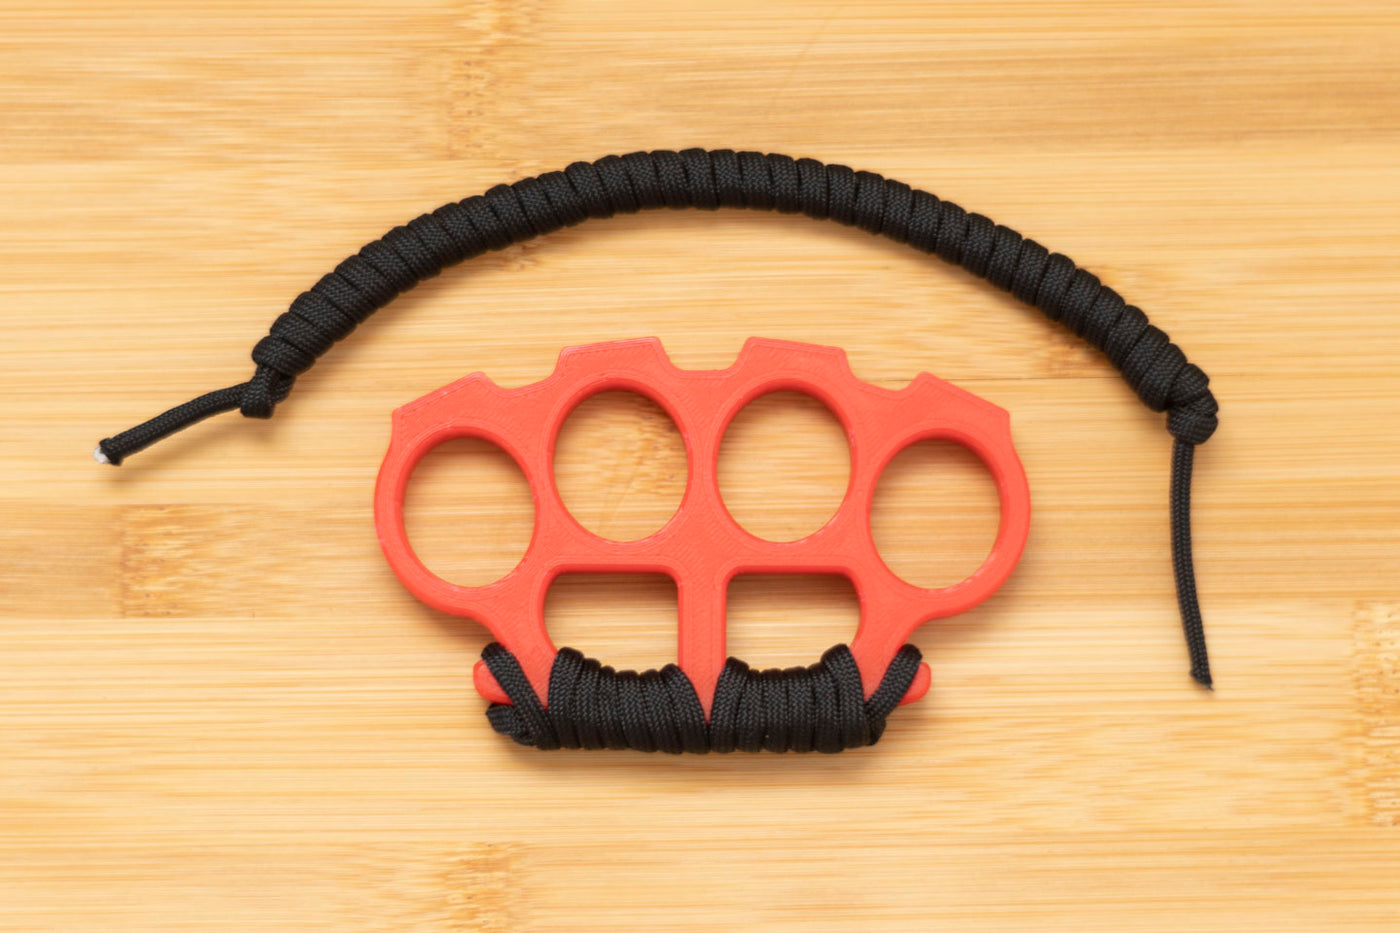 Brass Knuckles with Black Paracord